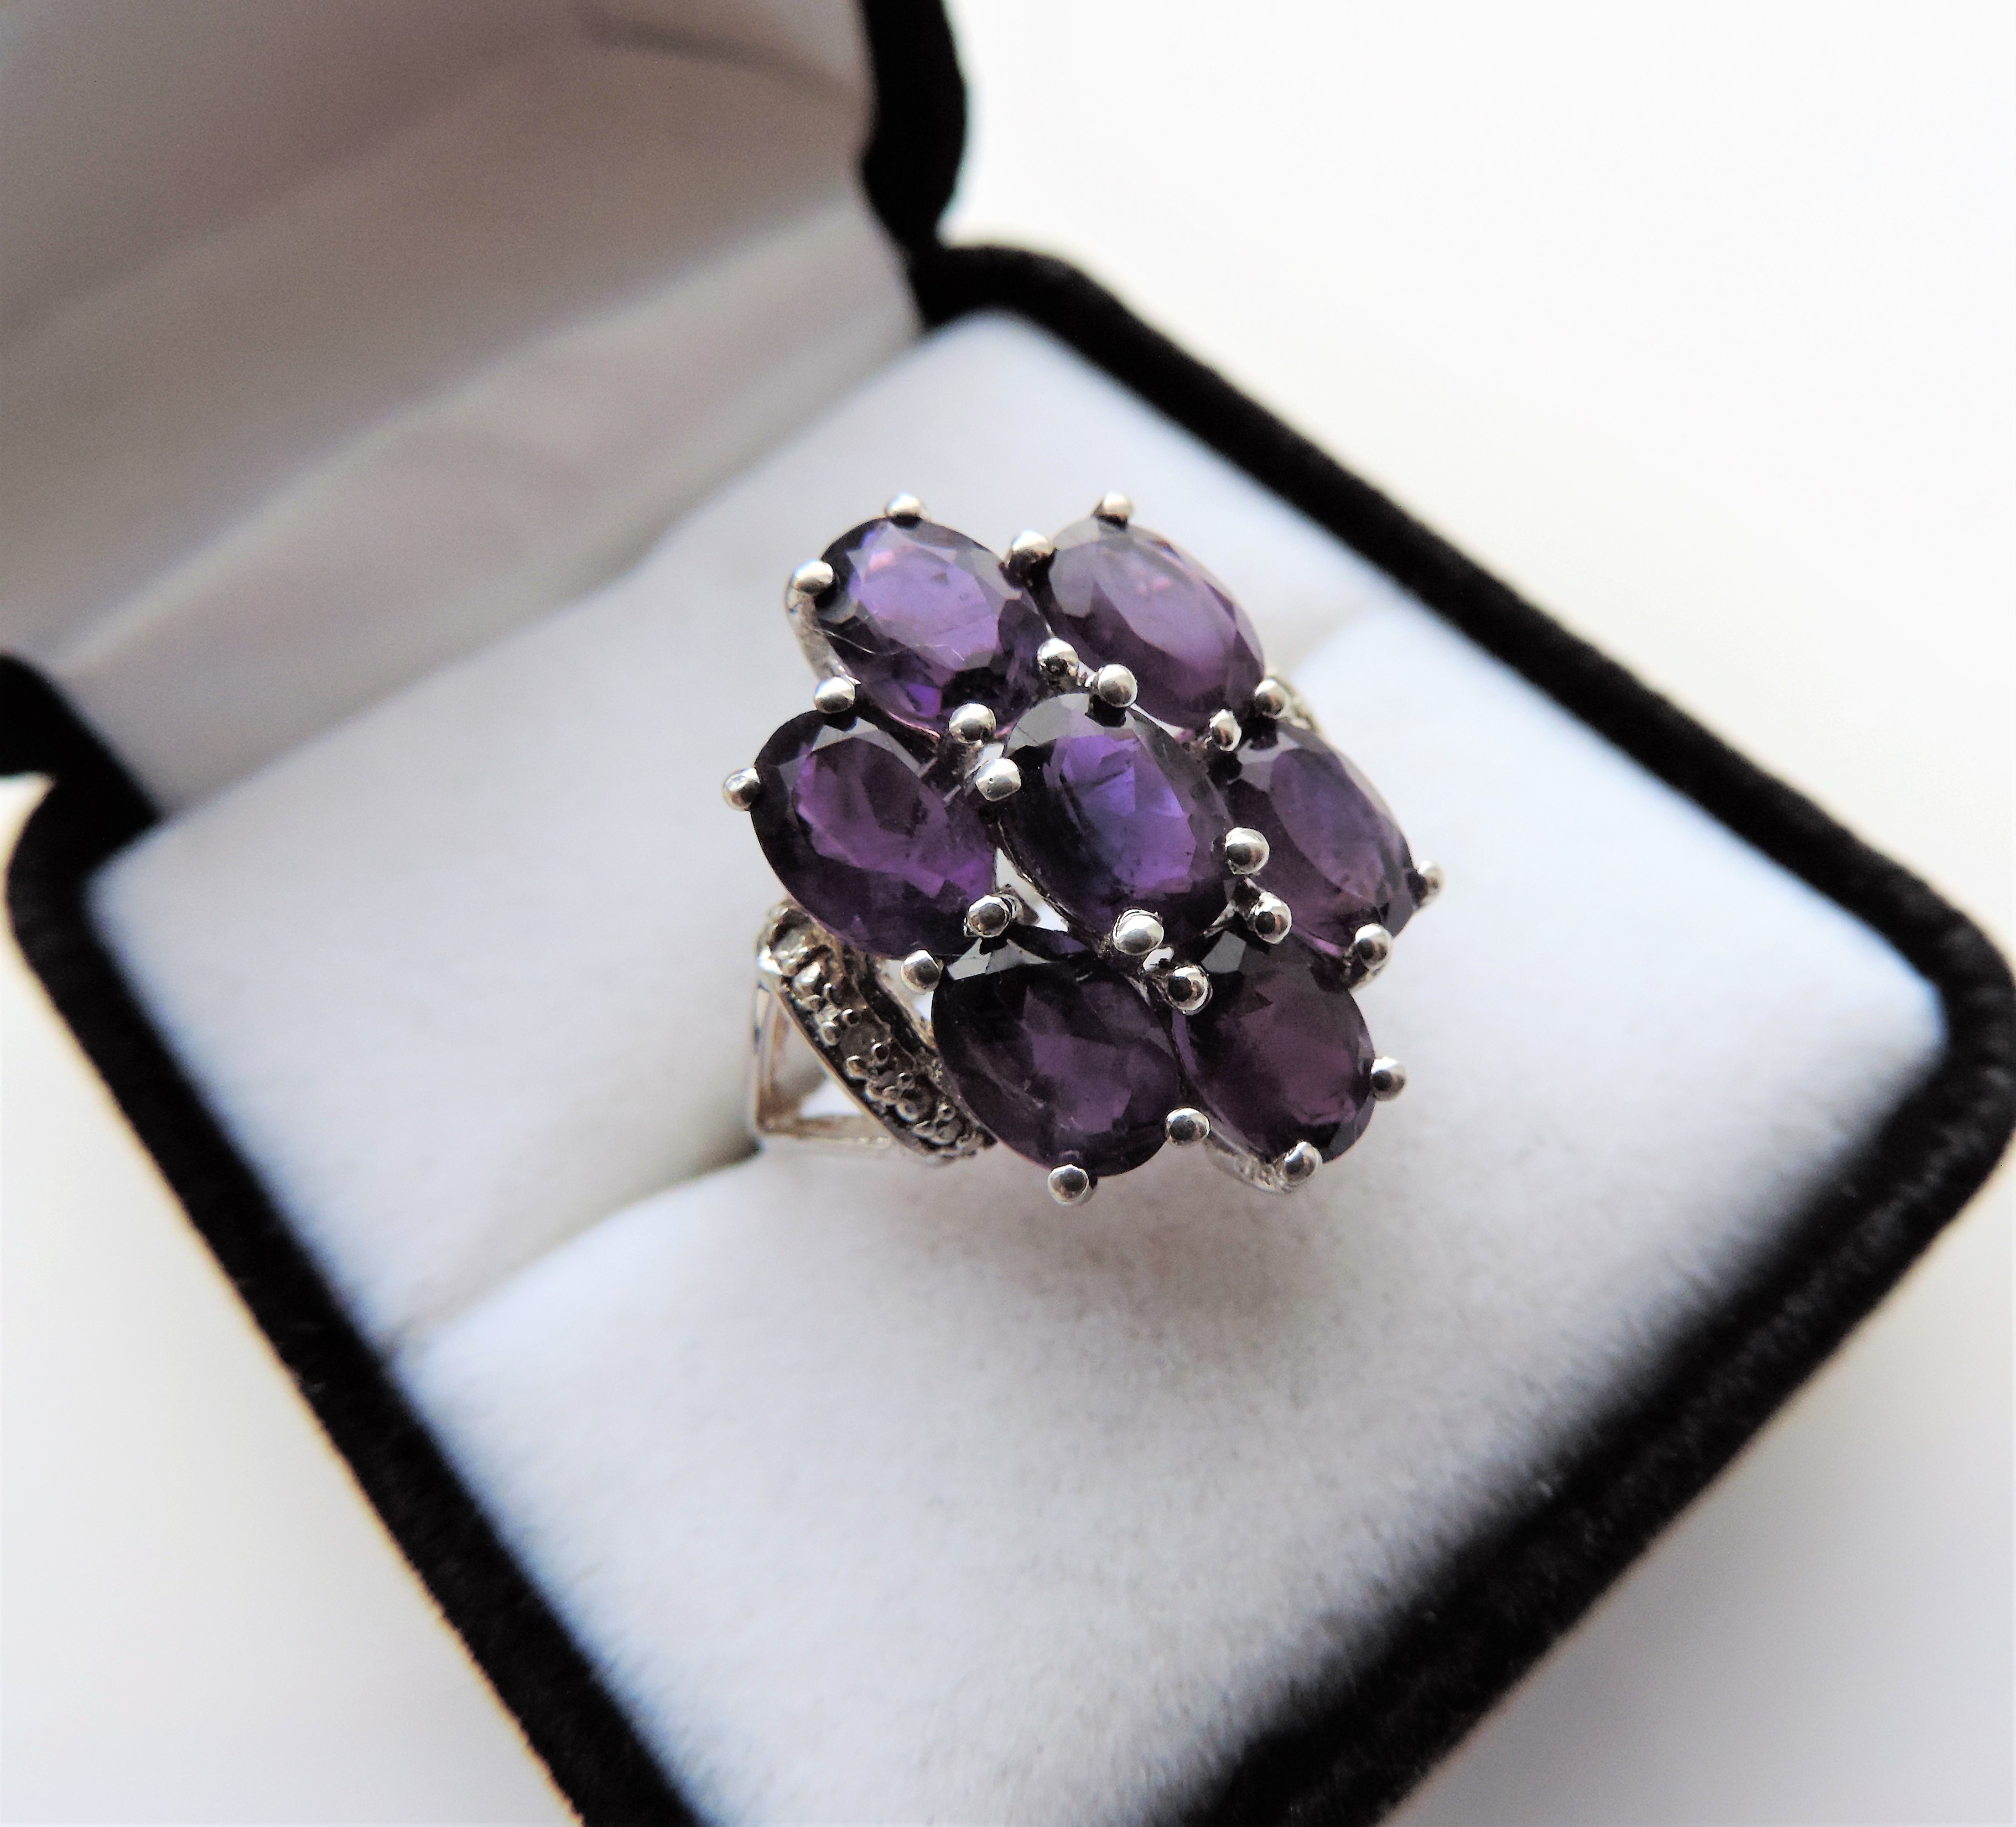 3.15 carat Amethyst Cluster Ring - Image 5 of 5